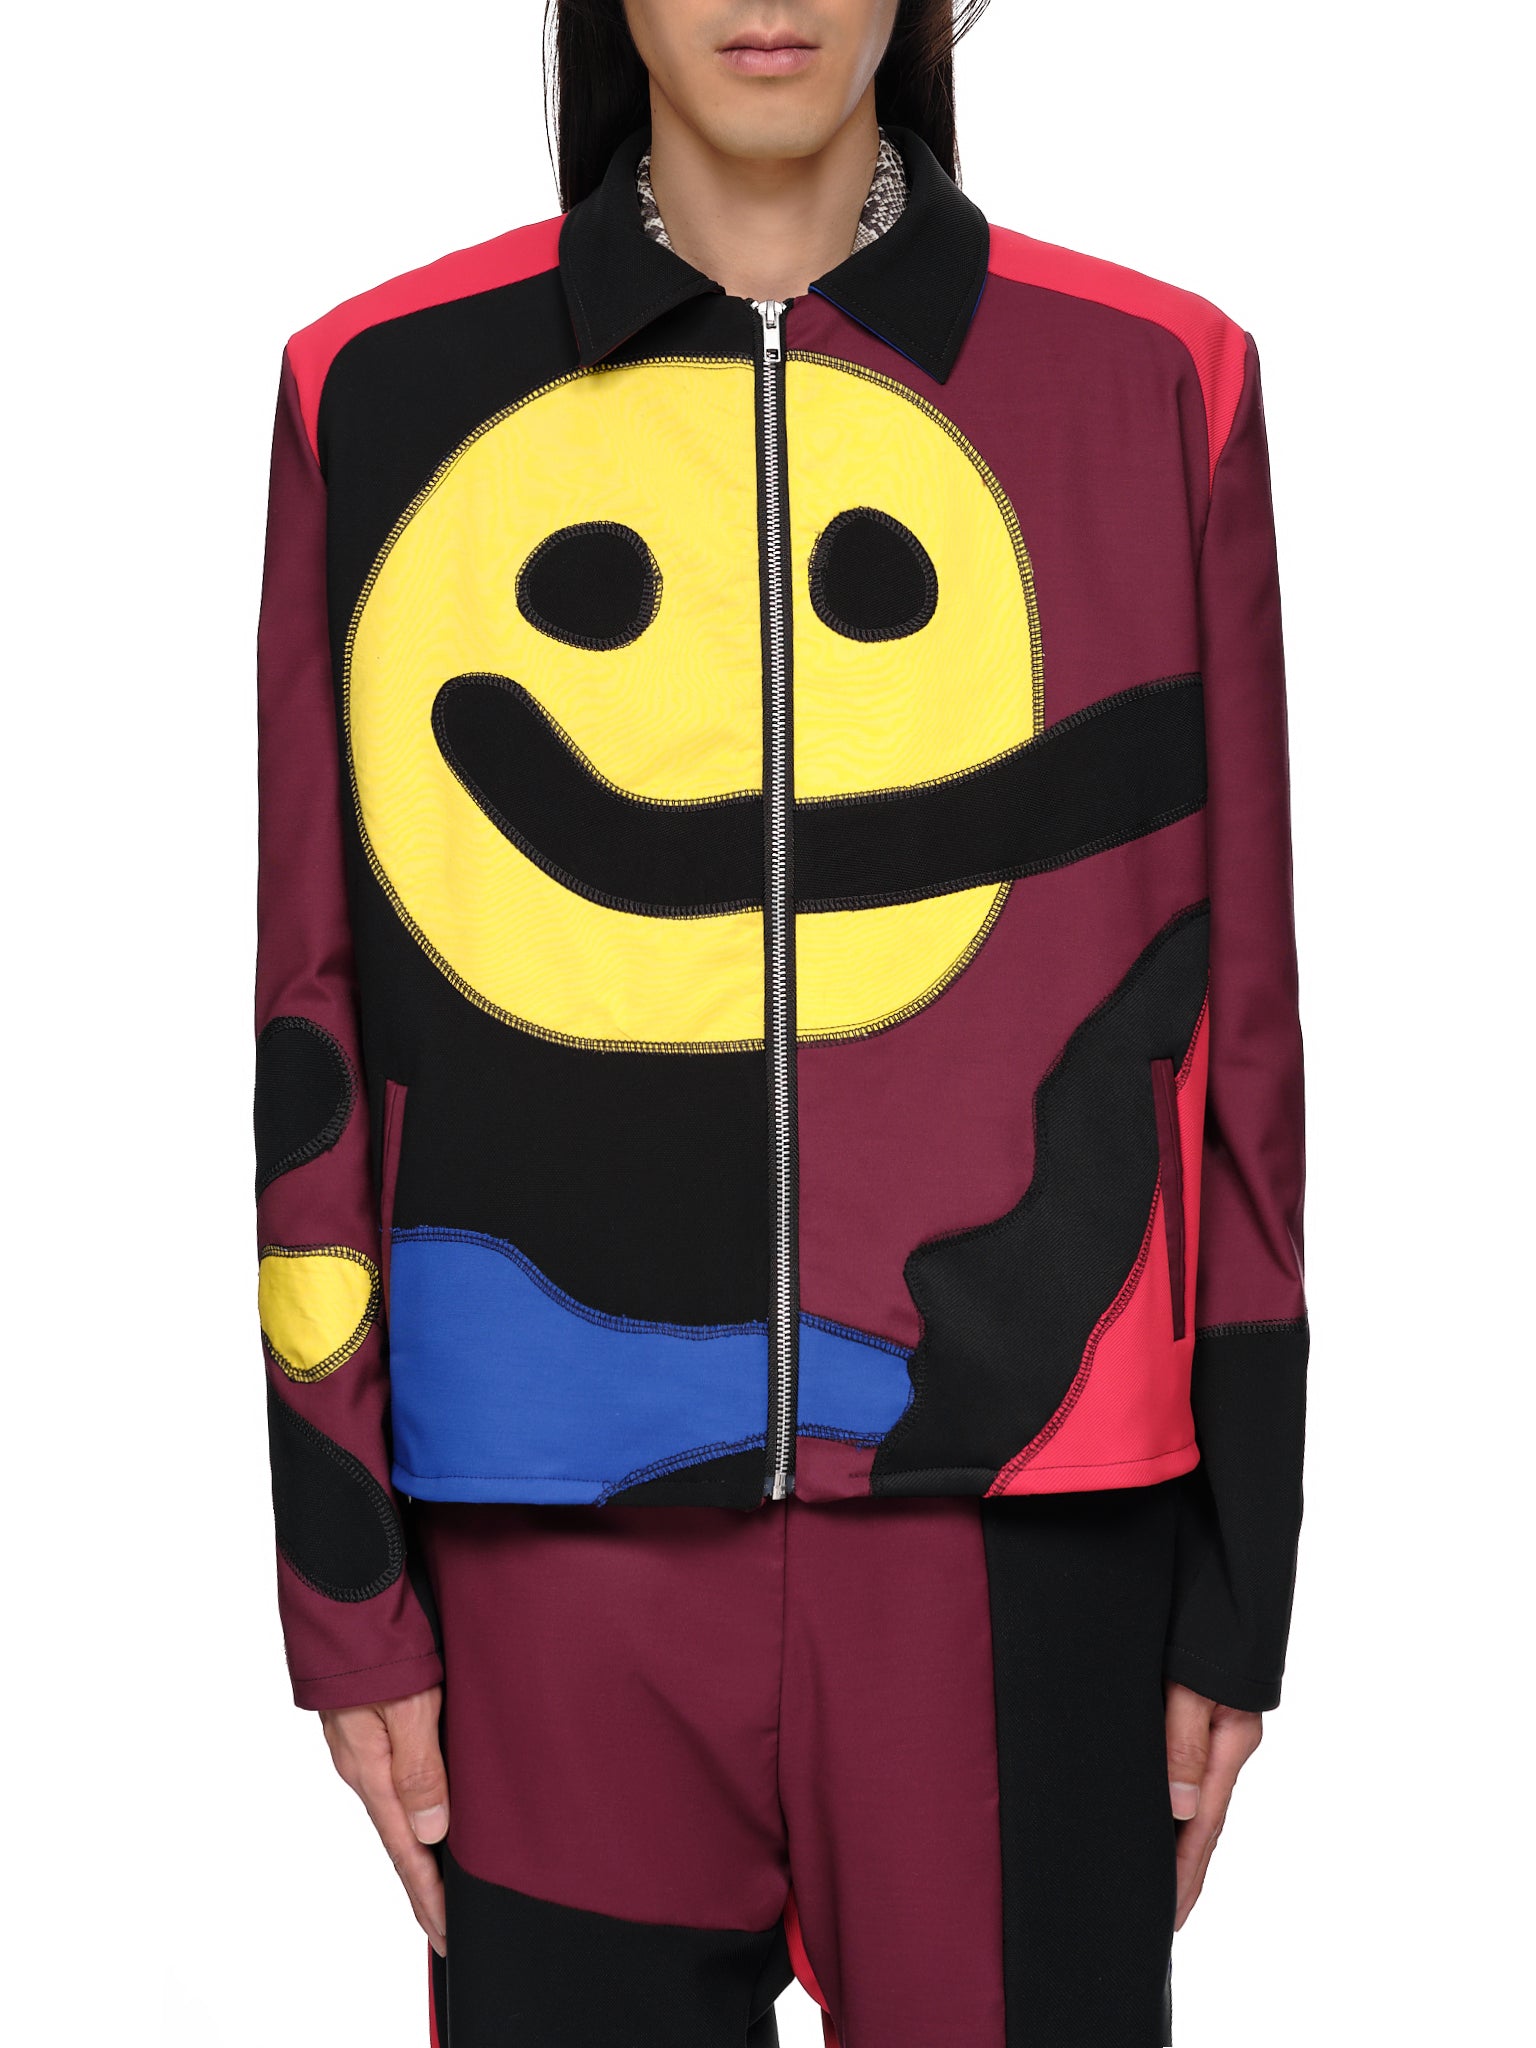 Bethany Williams Patchwork Smiley Jacket | H. Lorenzo - front